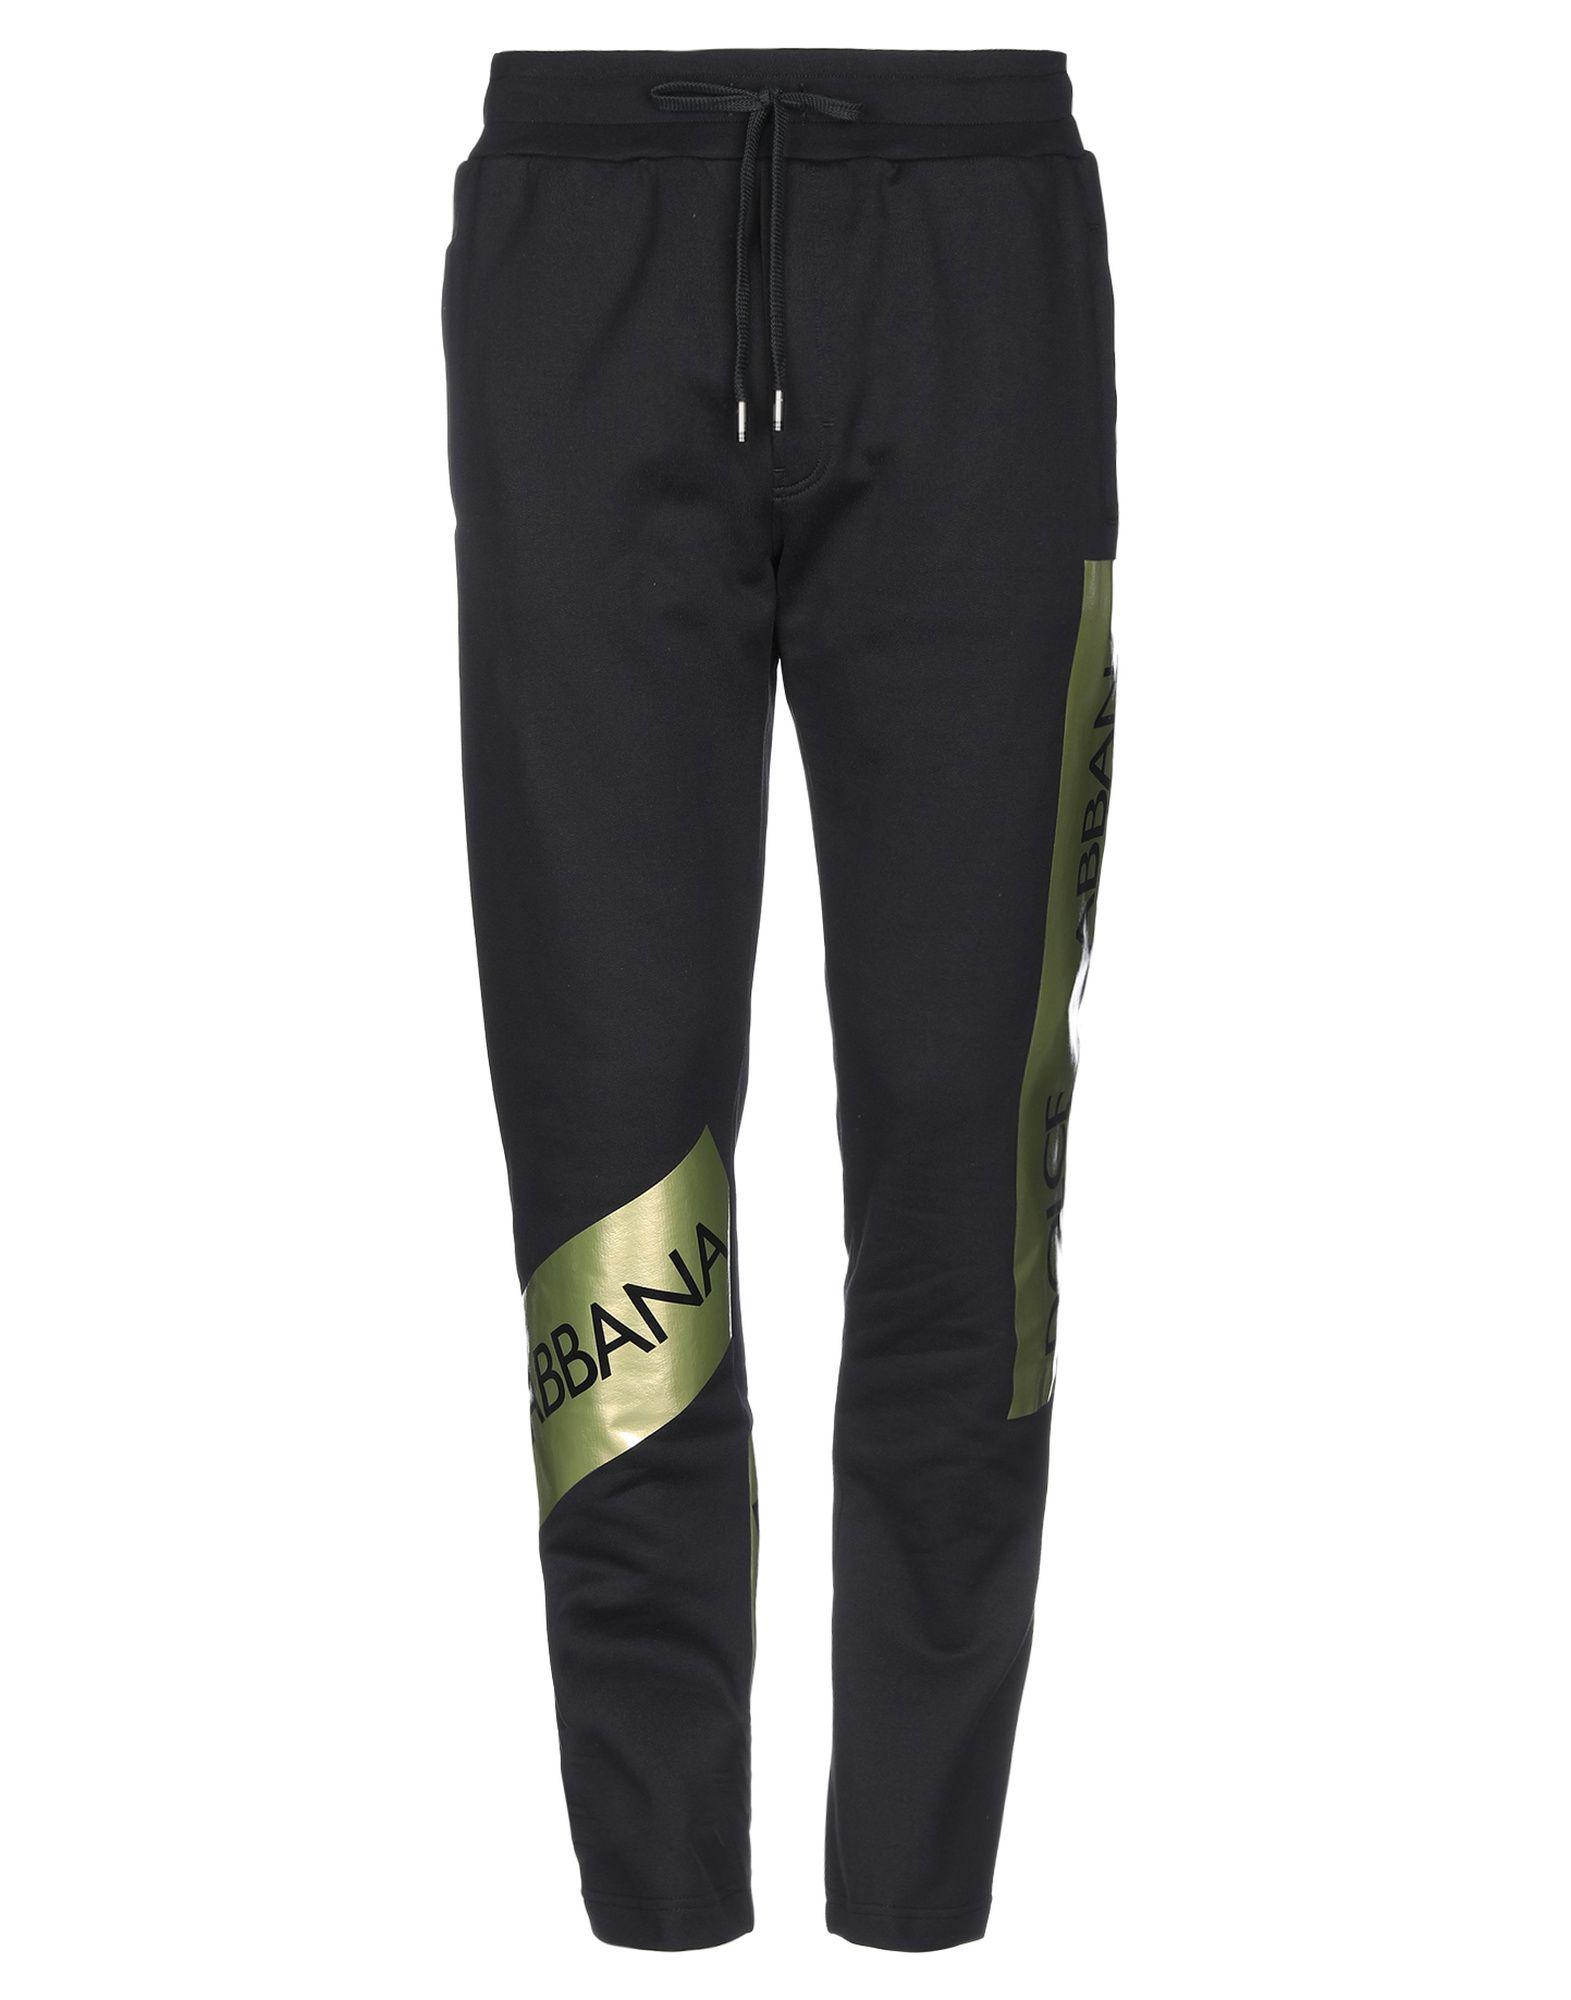 Dolce & Gabbana Casual Pants in Black for Men - Lyst